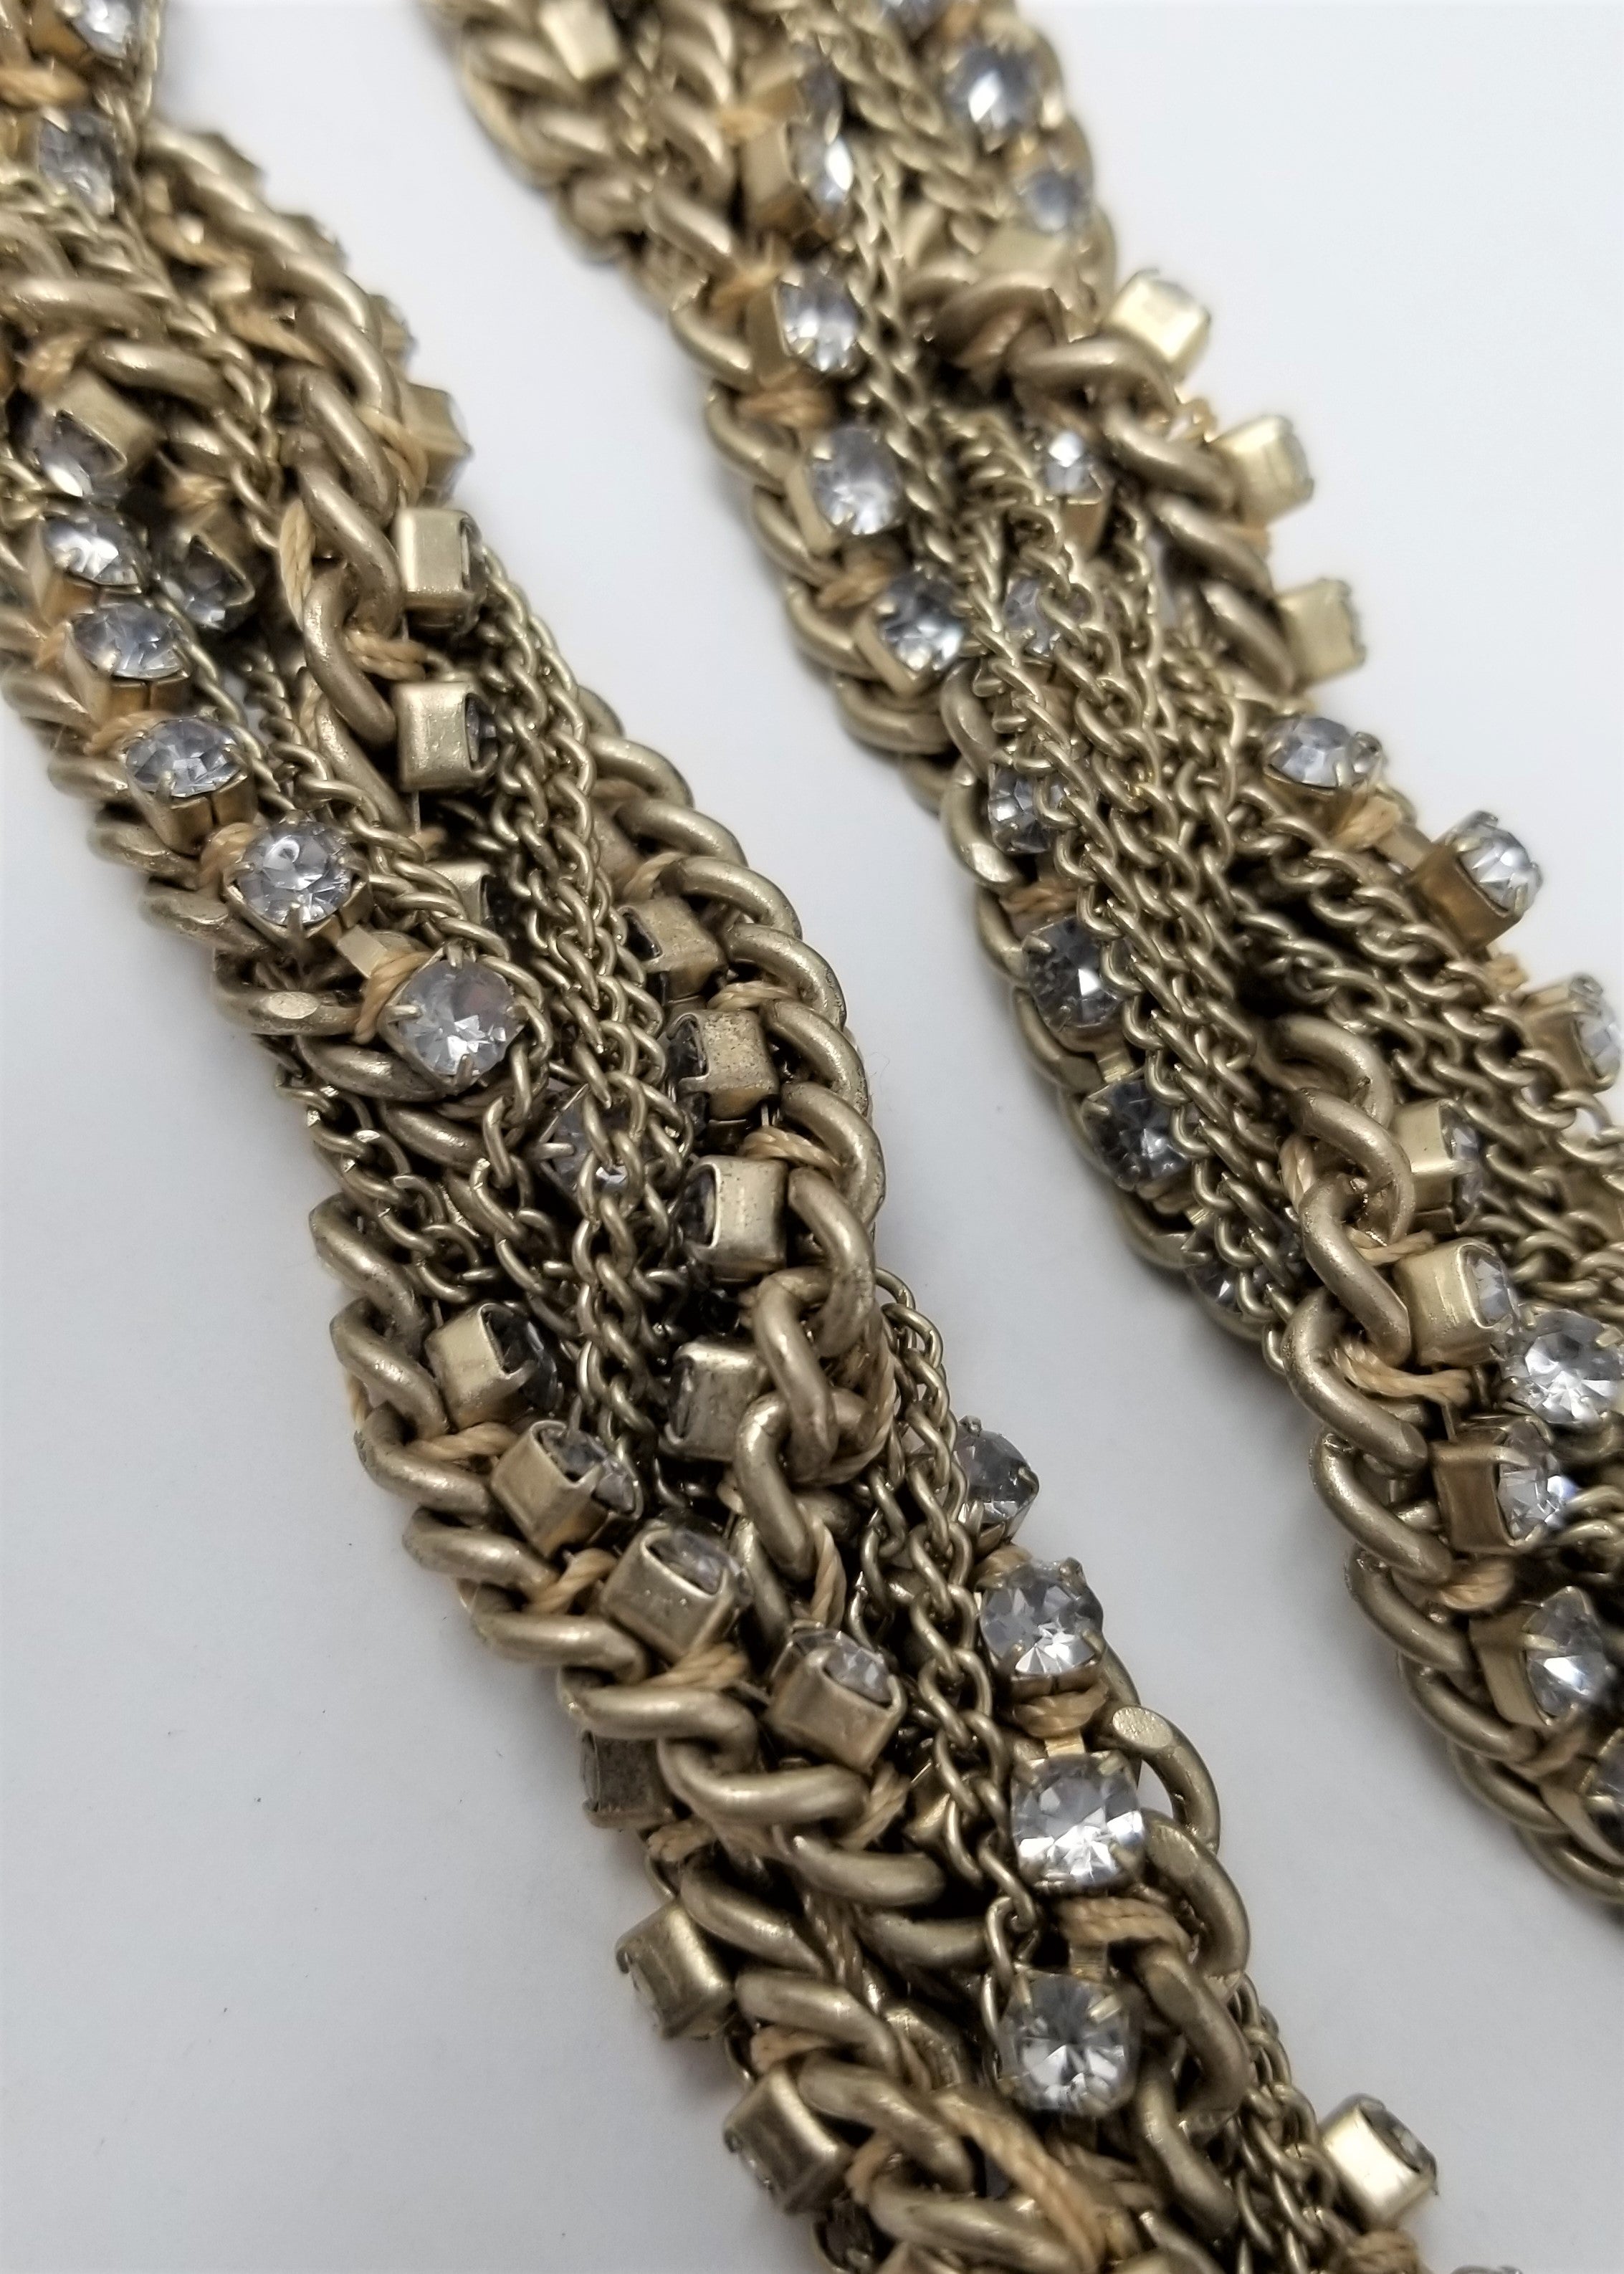 Stunning Antique Gold Chain and Rhinestone Necklace